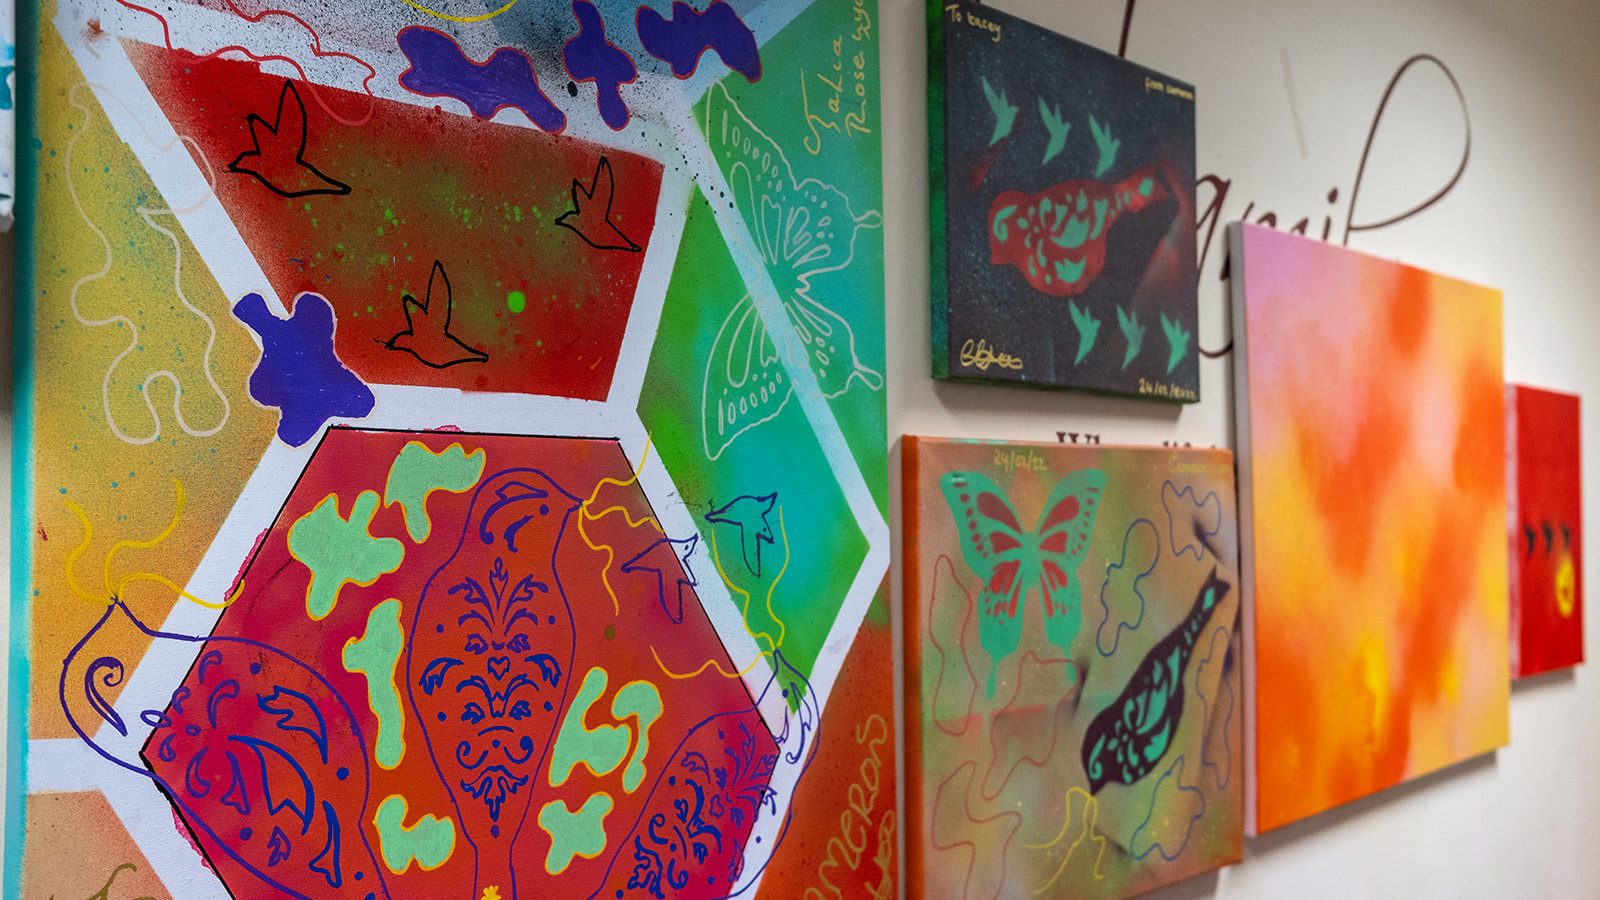 A collection of spray painted canvases of different sizes hang on a wall. On the canvases are outlines of butterflies, birds and masses of colour.